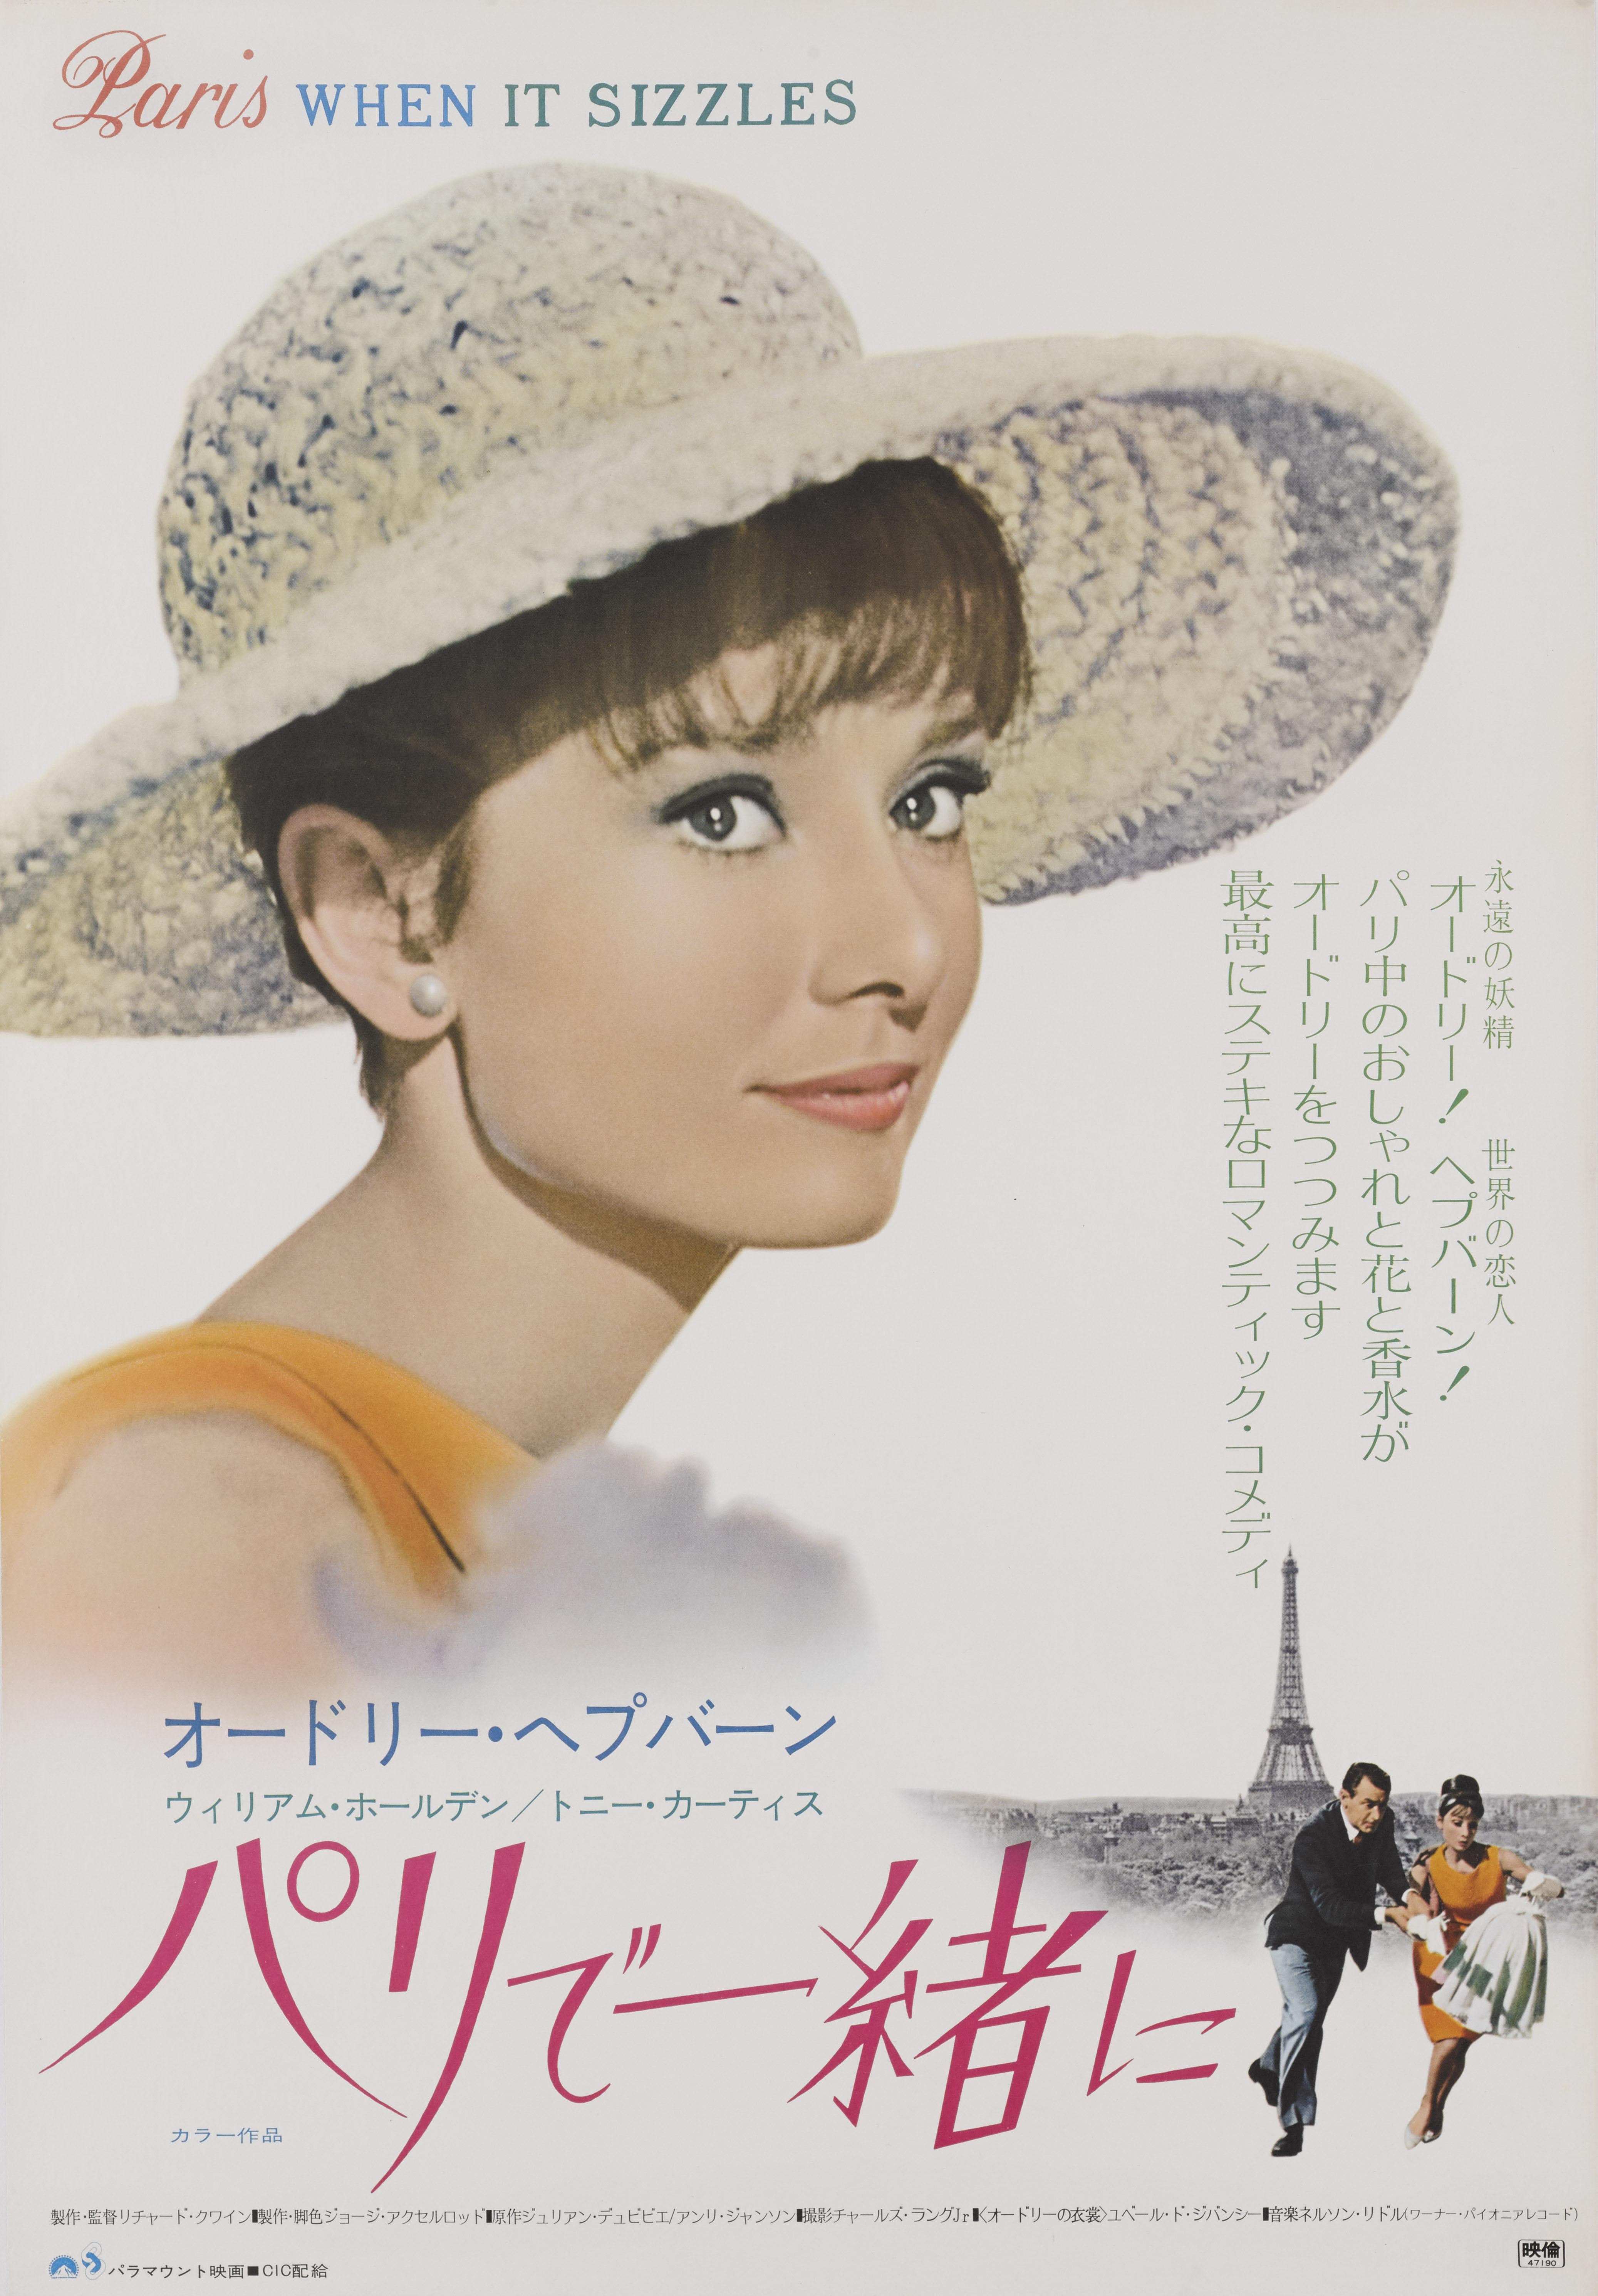 Original Japanese film Paris When it Sizzles 1964.
This poster was created for the film's Japanese re-release in 1972.
This romantic comedy was directed by Richard Quine, and stars William Holden, Audrey Hepburn, Gregoire Aslan, Raymond Bussieres,